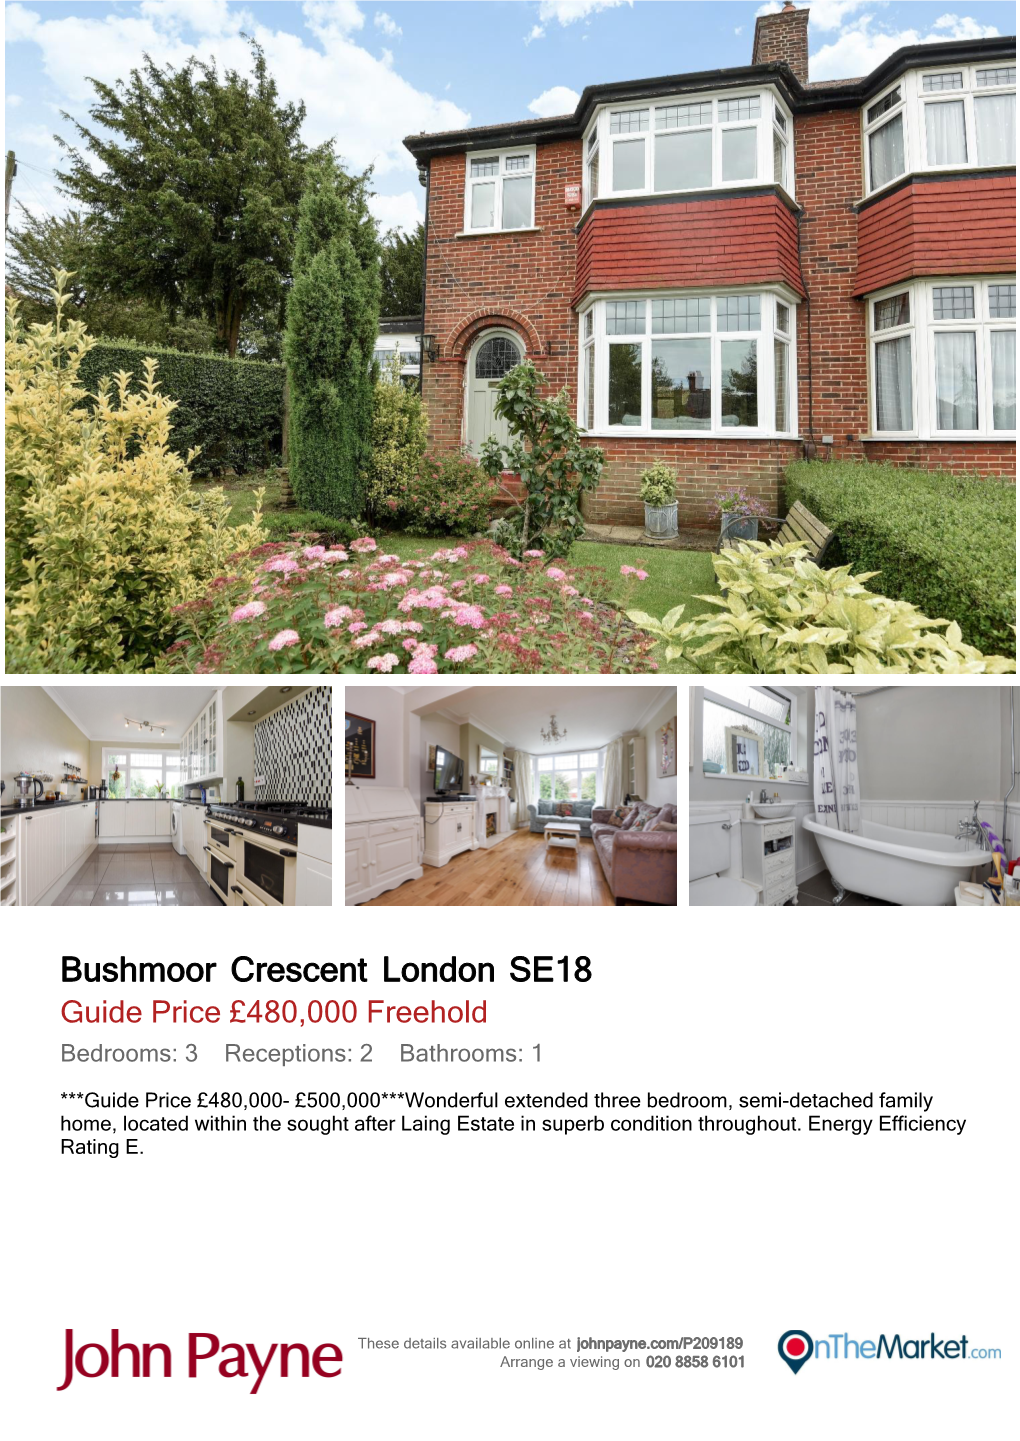 Bushmoor Crescent London SE18 Guide Price £480,000 Freehold Bedrooms: 3 Receptions: 2 Bathrooms: 1